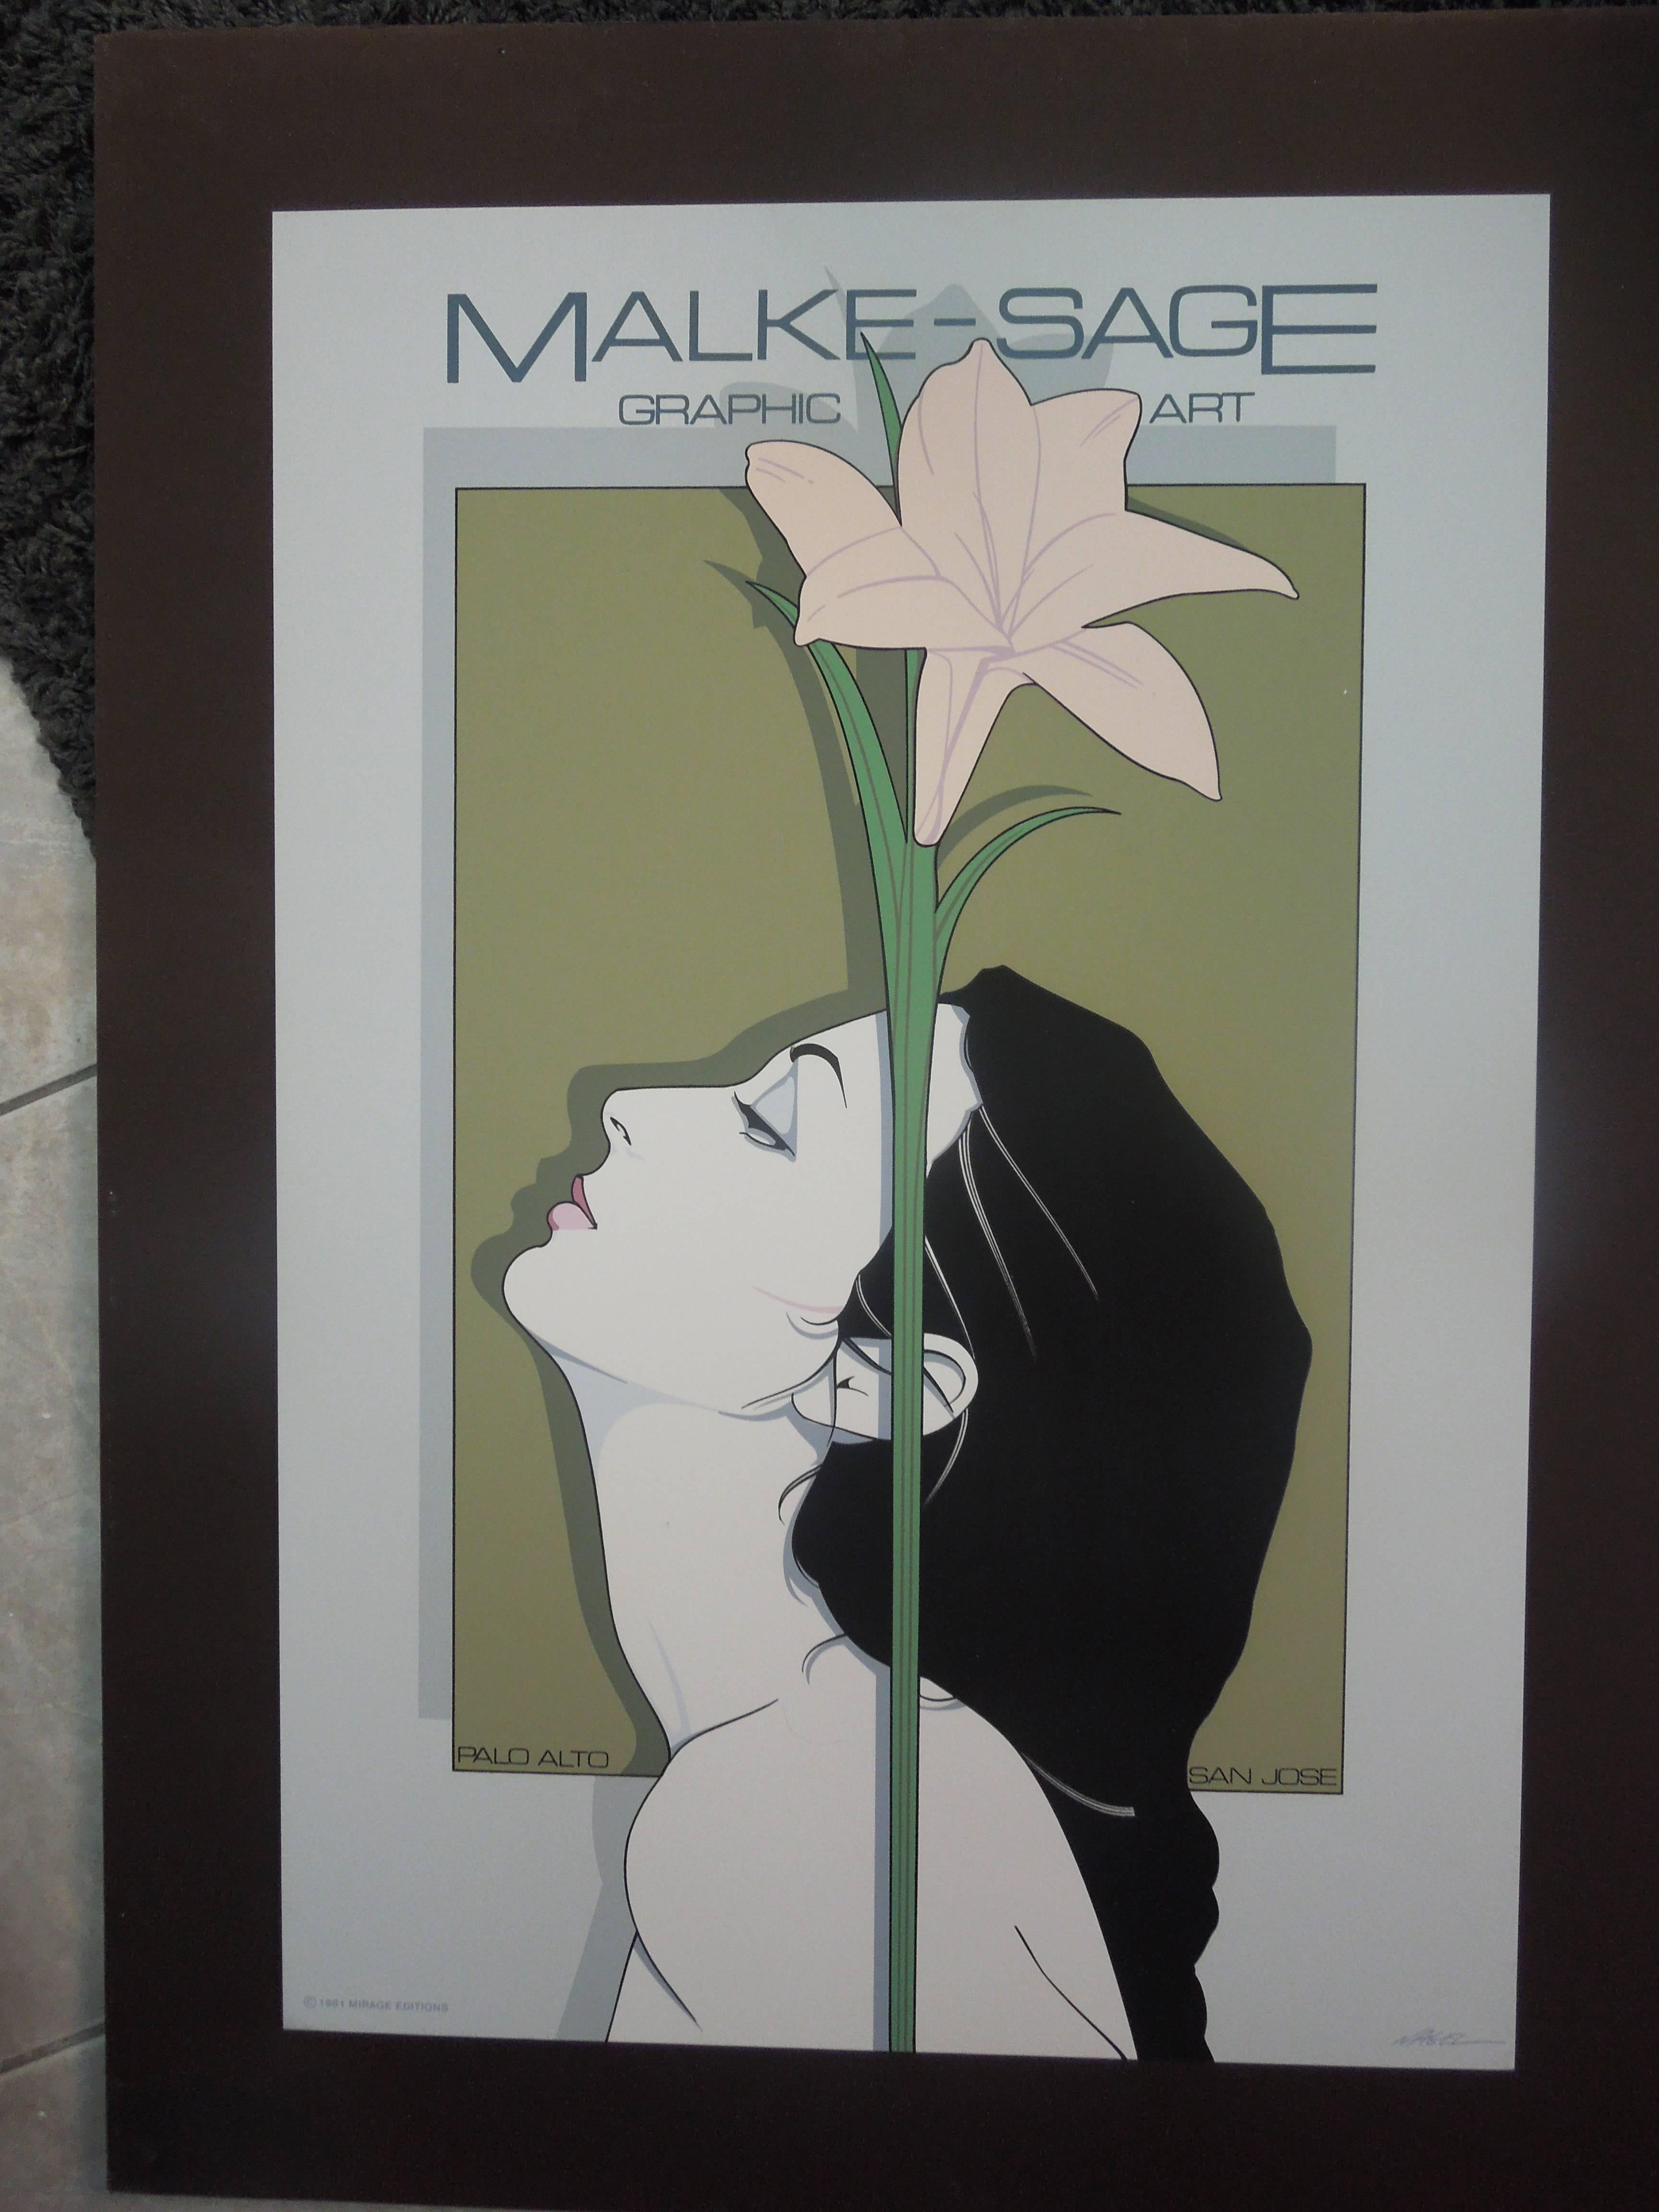 Pair of vintage Patrick Nagel (1945-1984) silkscreens. These are real Nagel serigraphs, printed by hand. Not a cheap offset litho. Malke Sage 1981, Mother Earth Paris, 1978. In original plexi frames ready to hang. Both images 17 x 25. Framed size: